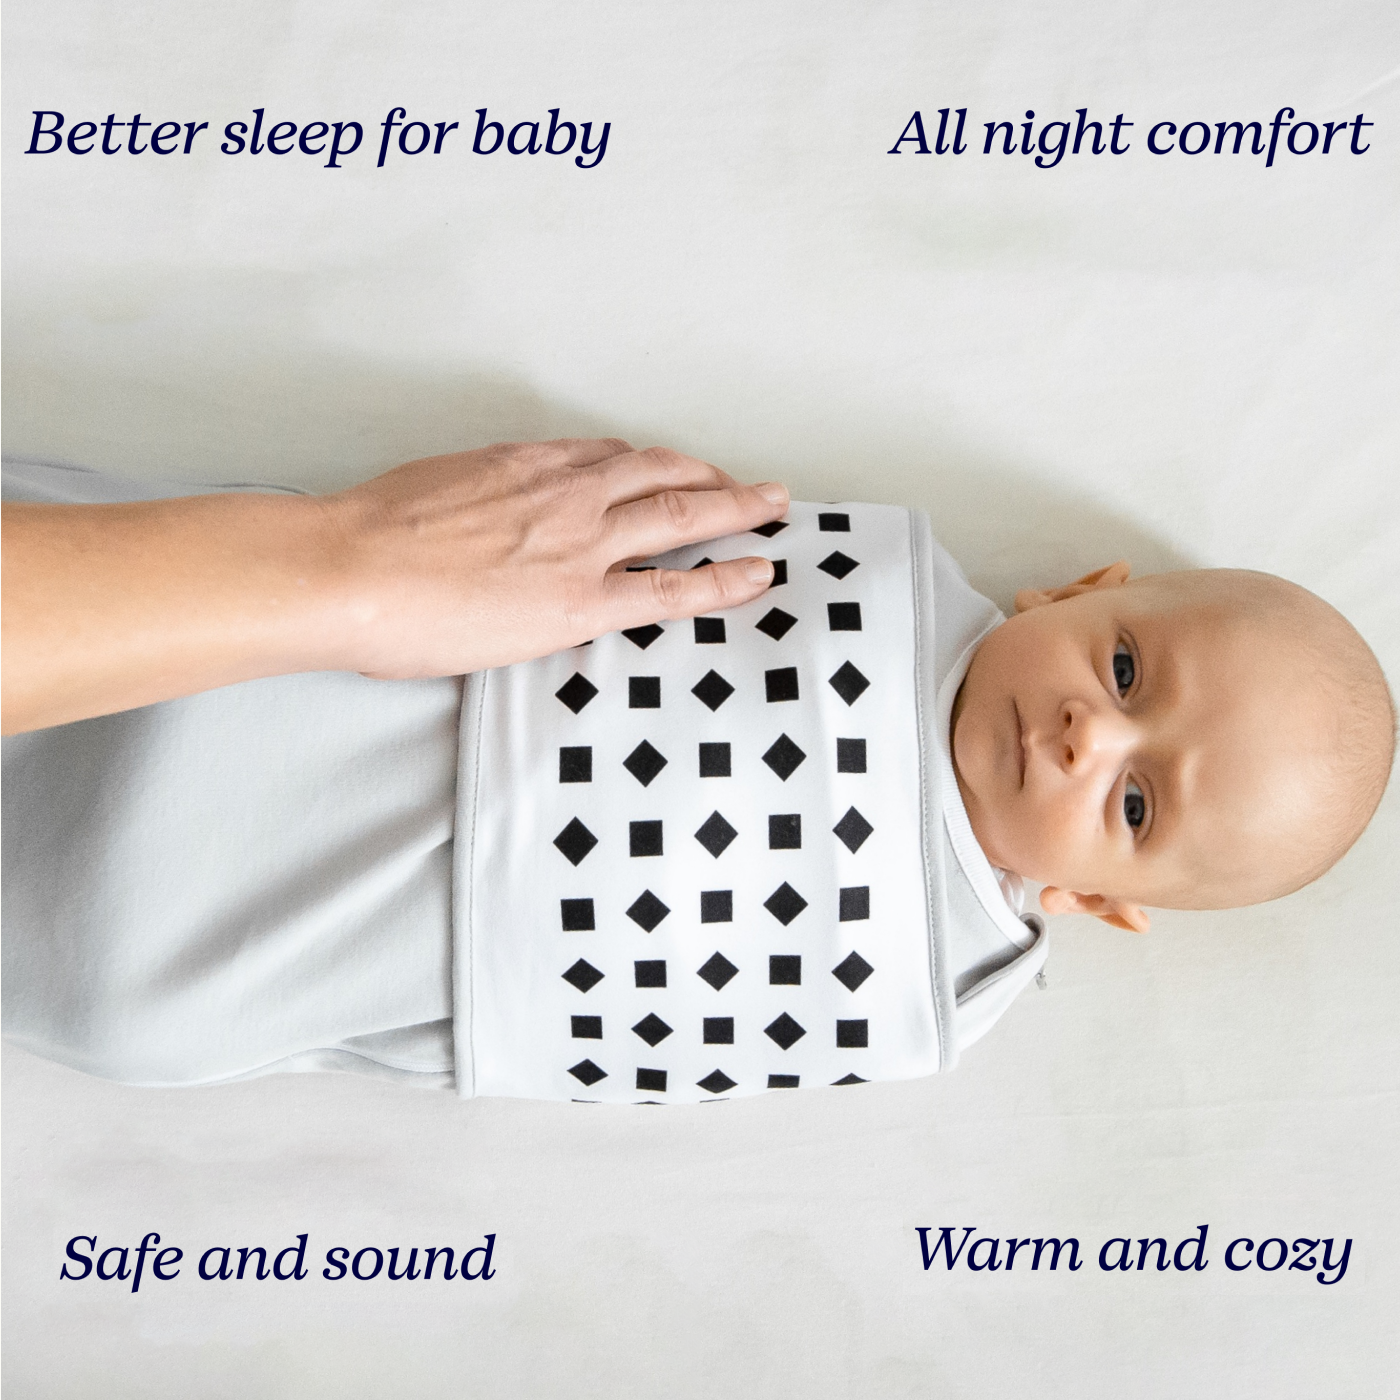 better sleep for baby, all night comfort, safe and sound, and warm and cozy while baby laying down with nanit swaddle